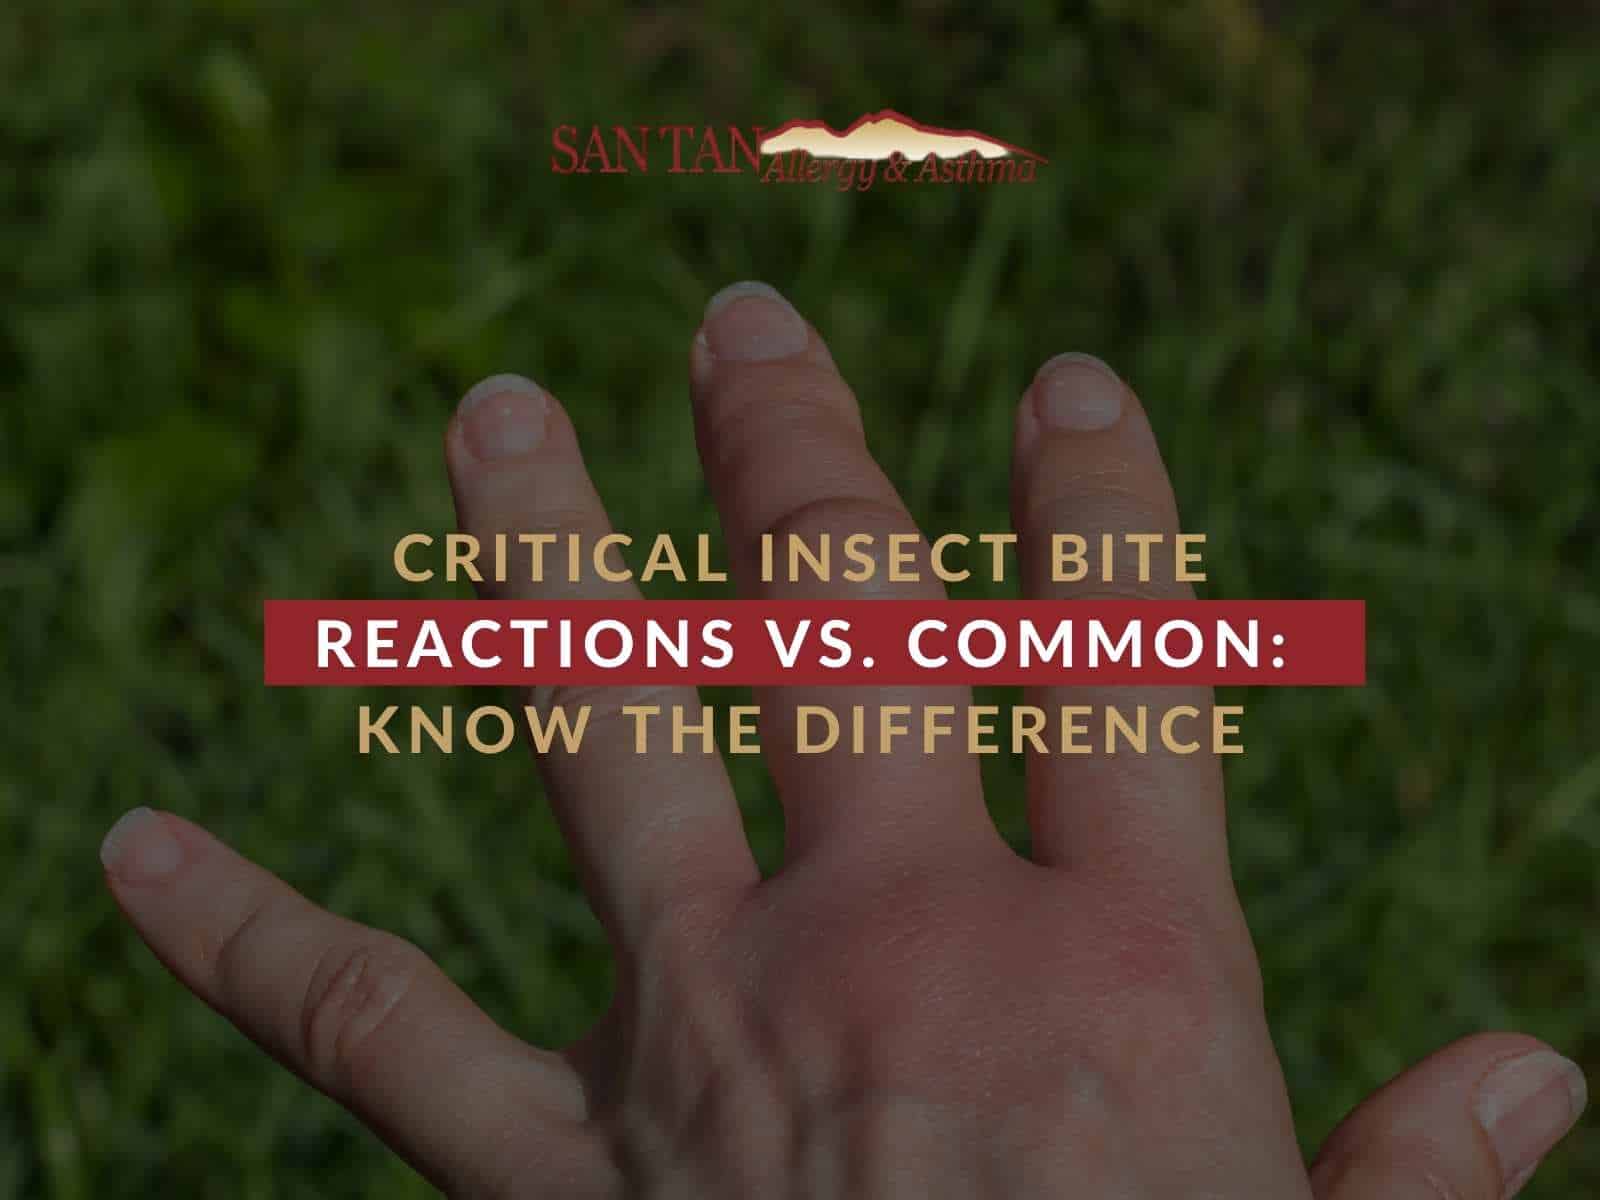 Critical Insect Bite Reactions Vs. Common: Know The Difference